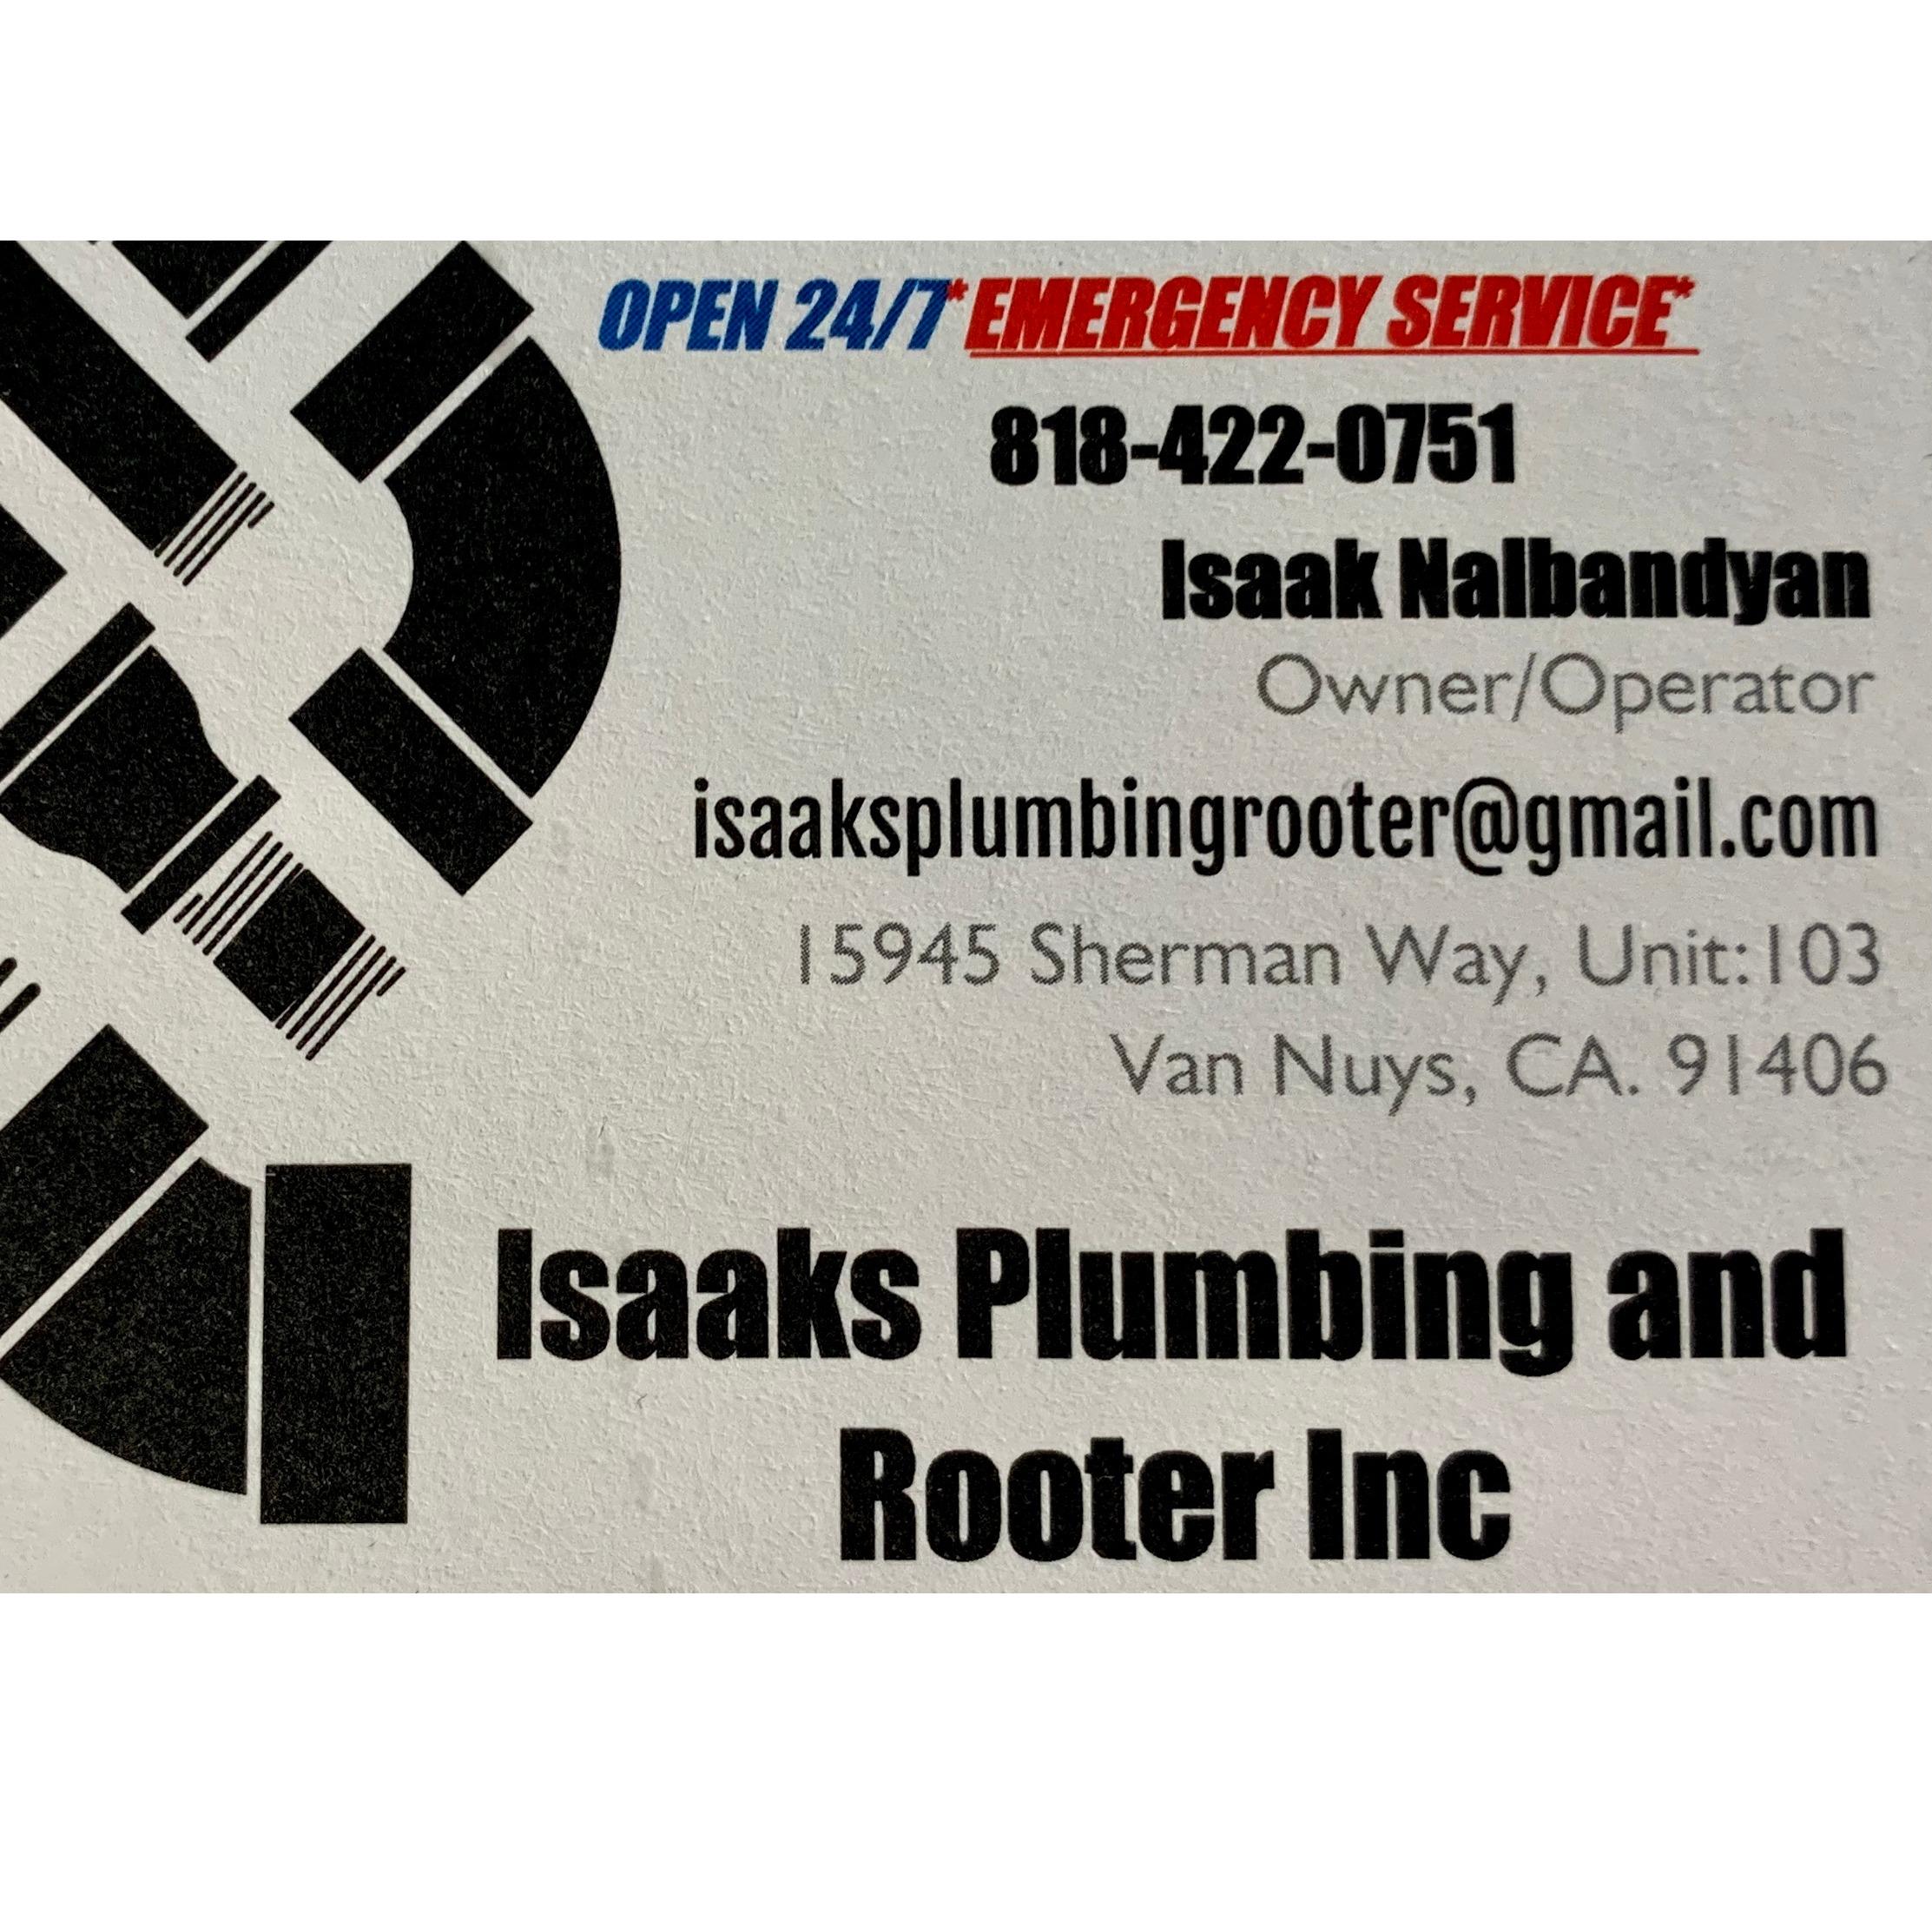 Isaaks Plumbing and Rooter Inc Photo